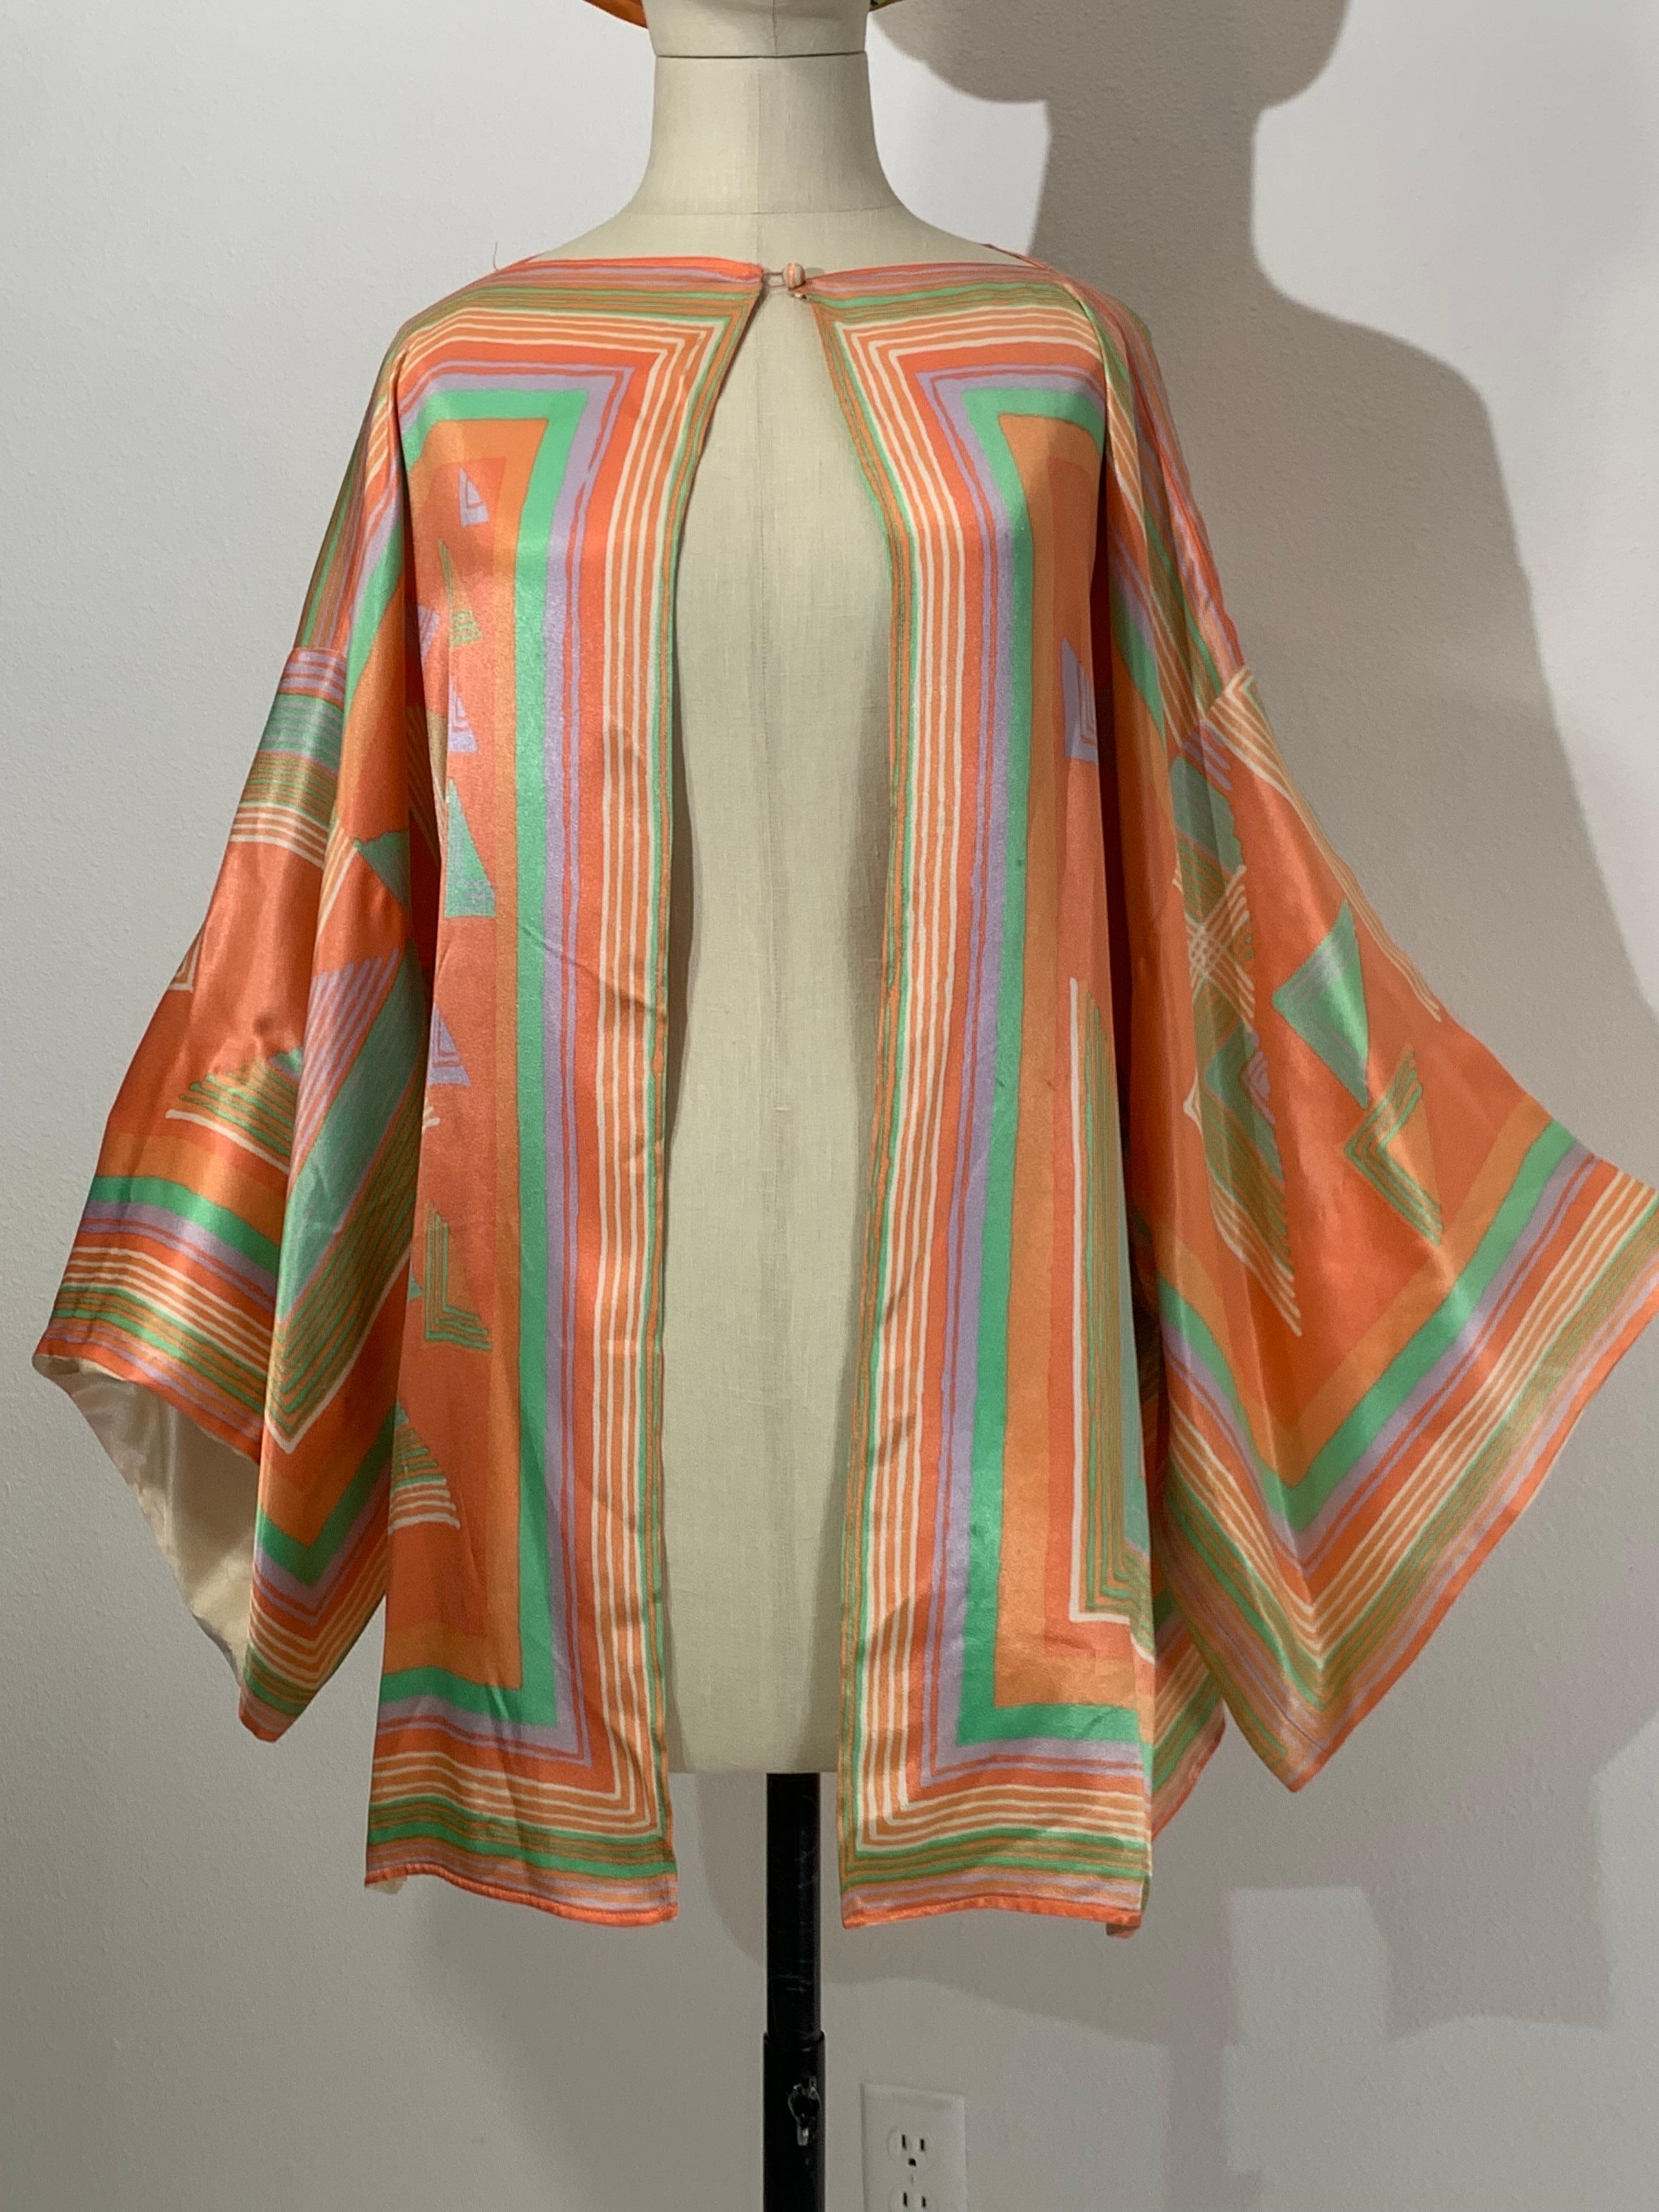 1970s Victor Costa Satin Deco-Revival Pastel Kimono Top Jacket:  A fabulously louche Art deco revival-style piece for languorous lounging!  In a most unusual pastel sorbet palette, this fabulous statement piece is so easy to wear, with trumpet